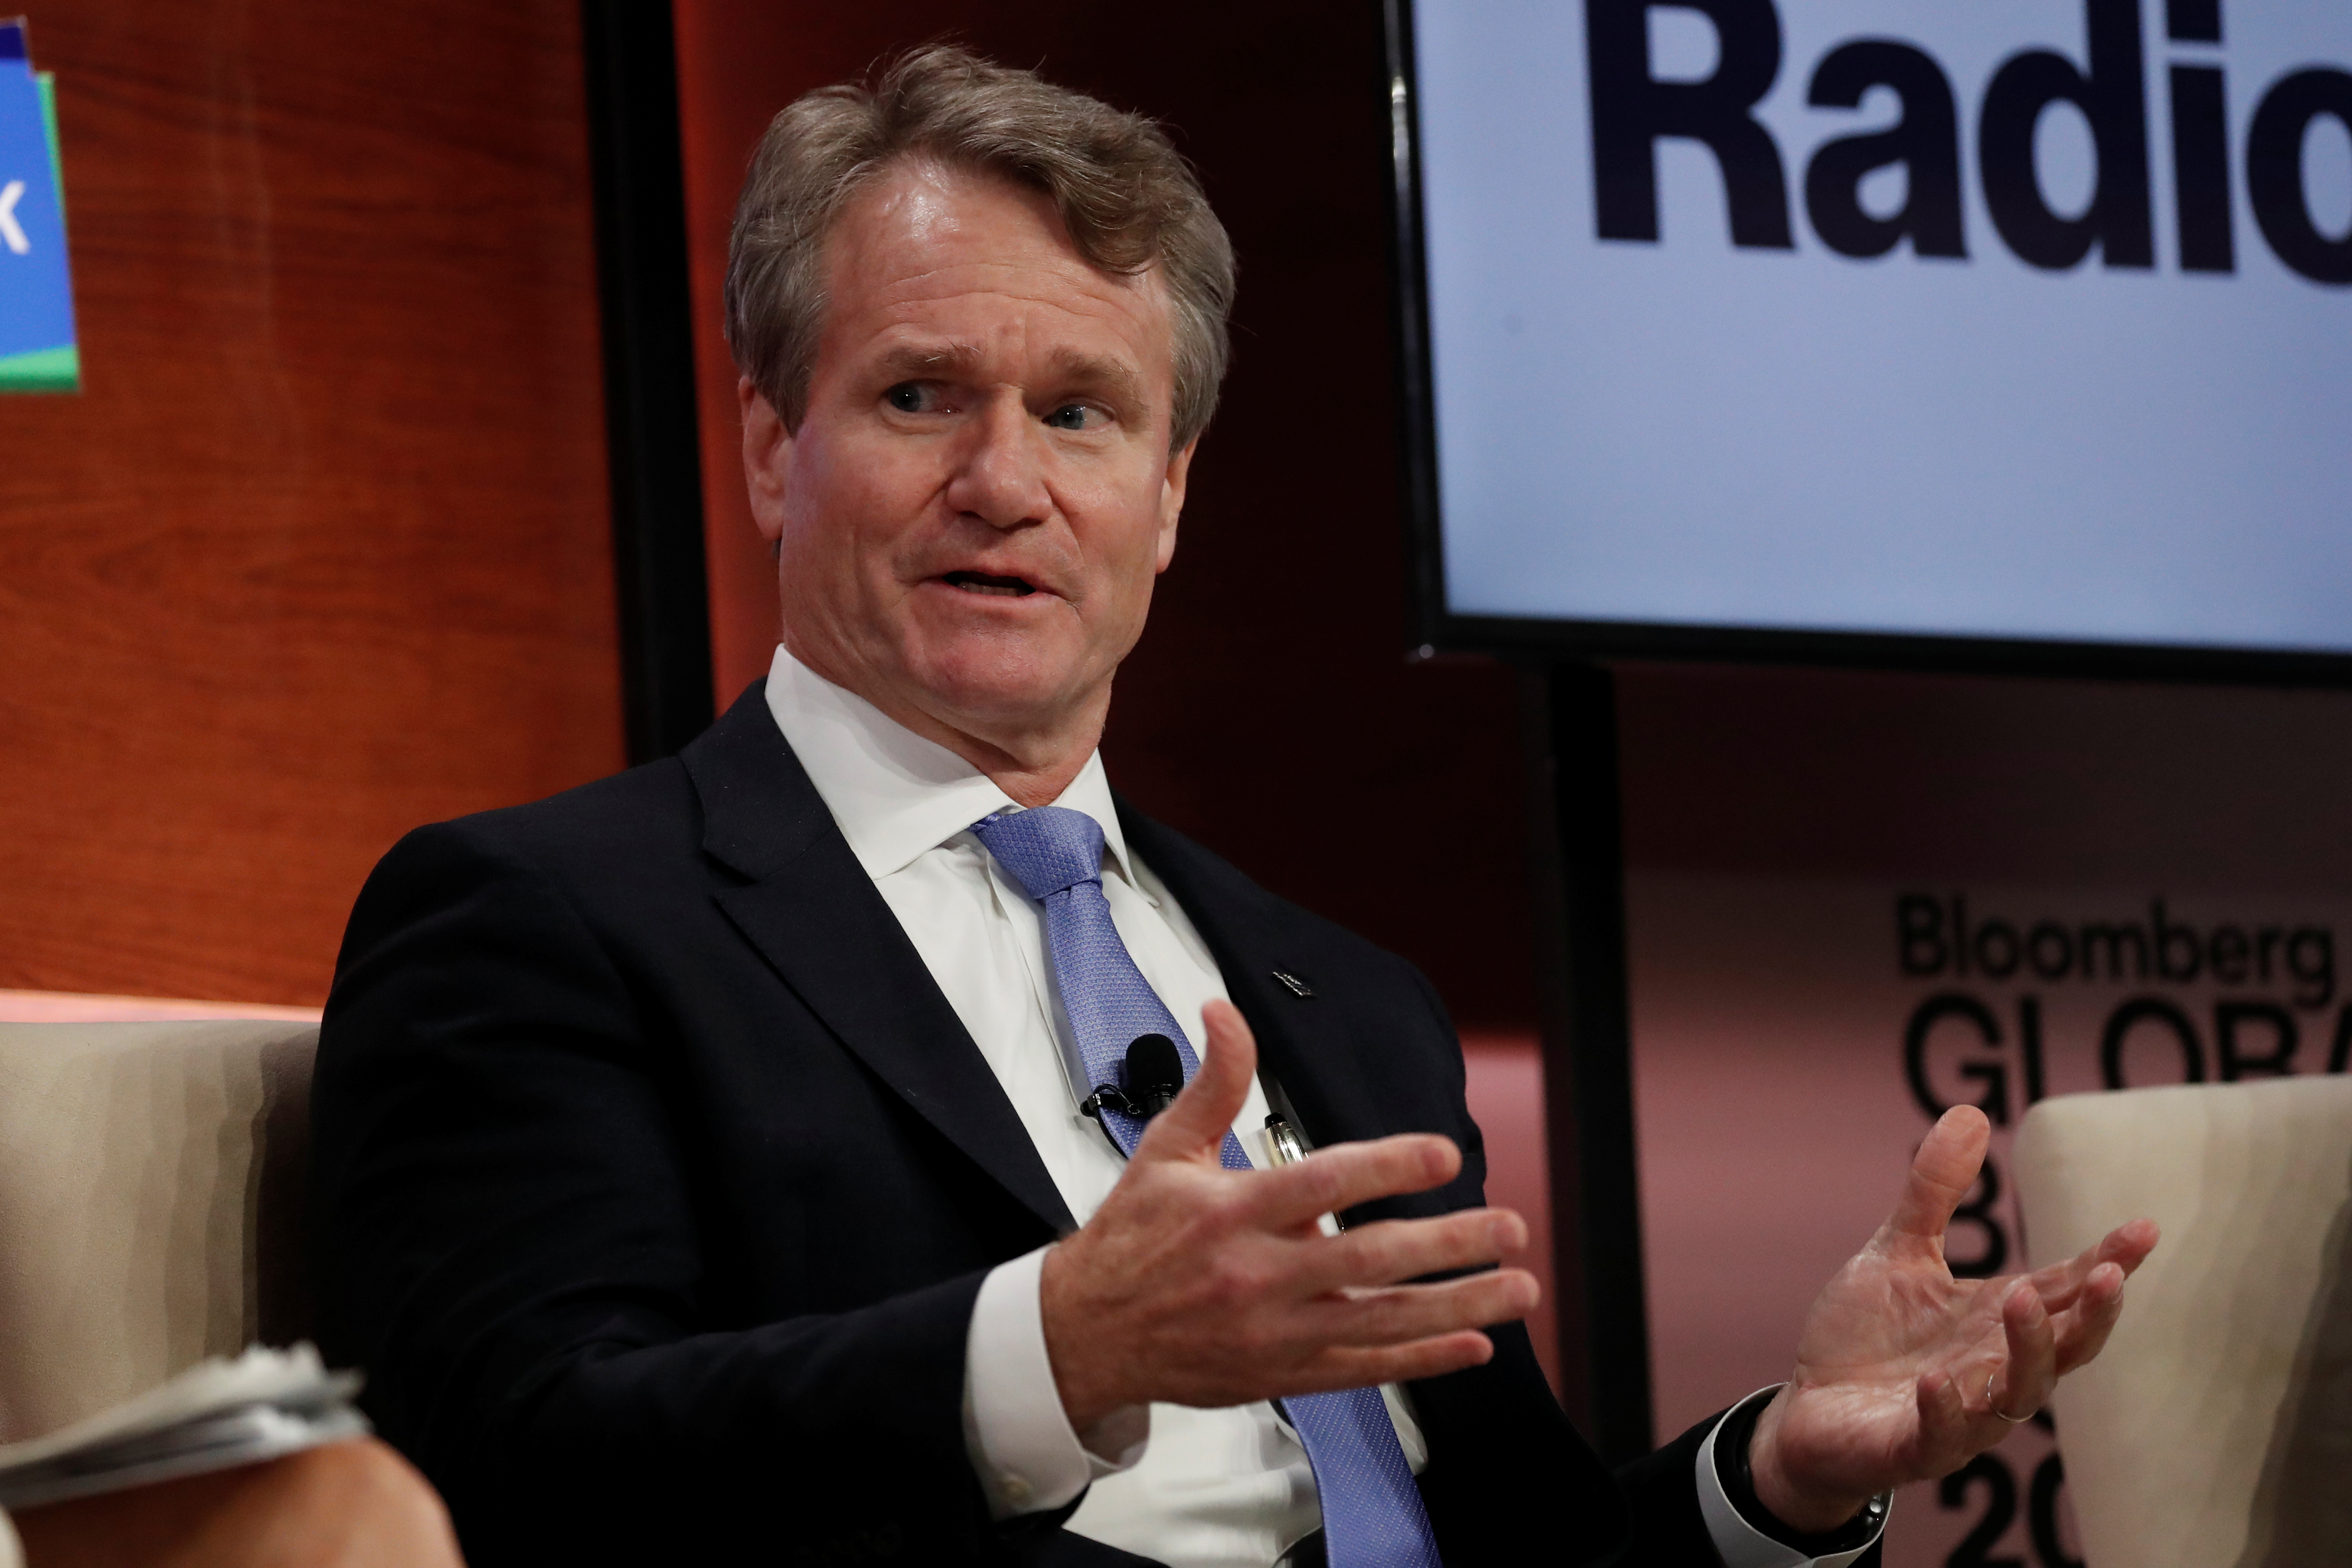 Brian T. Moynihan, Chairman and Chief Executive Officer of the Bank of America Corporation, speaks during the Bloomberg Global Business Forum in New York City